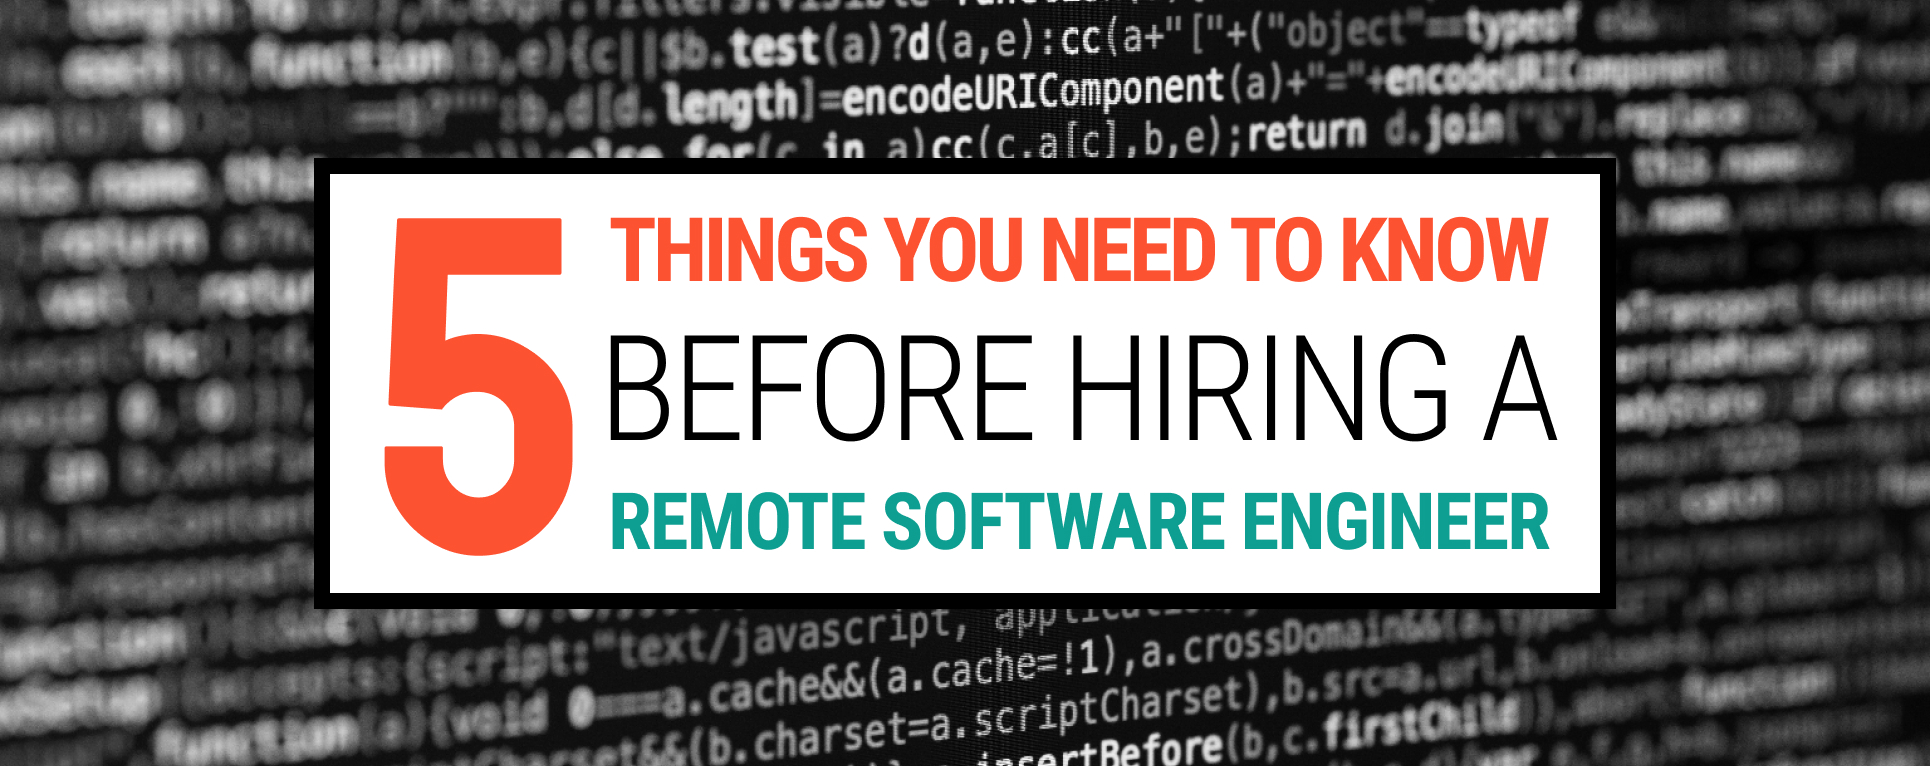 5 Things You Need to Know Before Hiring A Remote Software Engineer